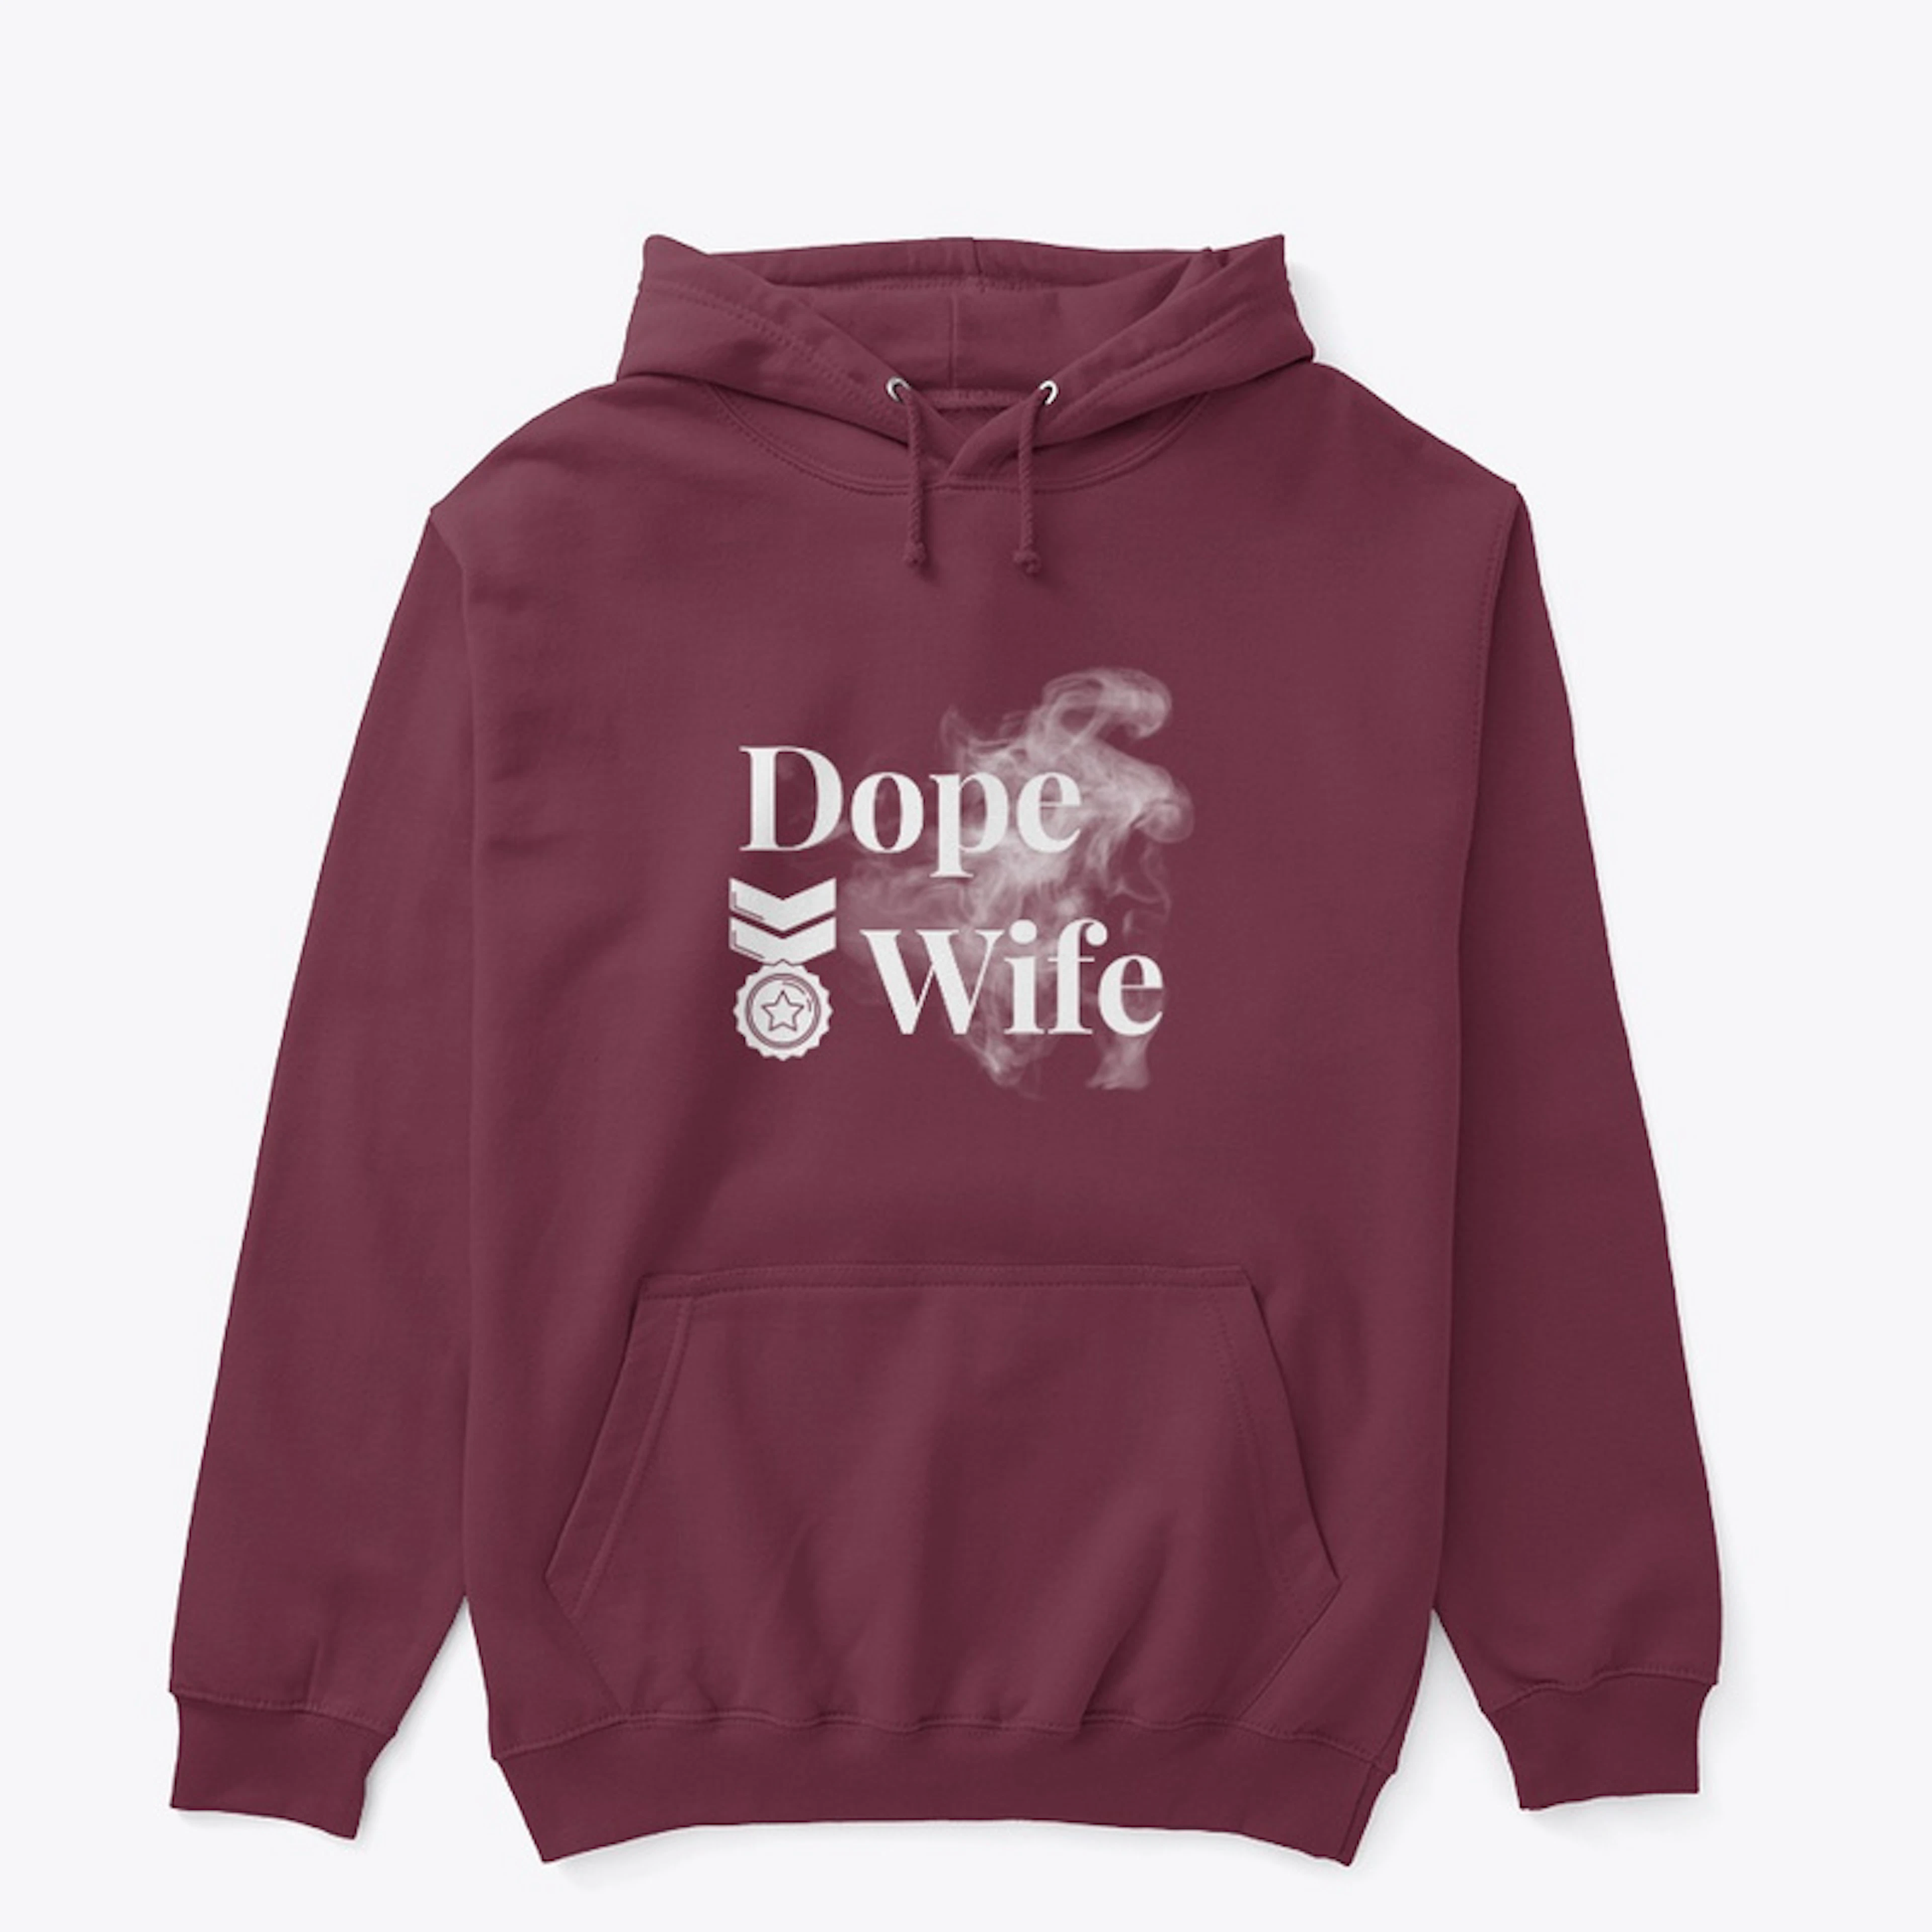 DOPE WIFE